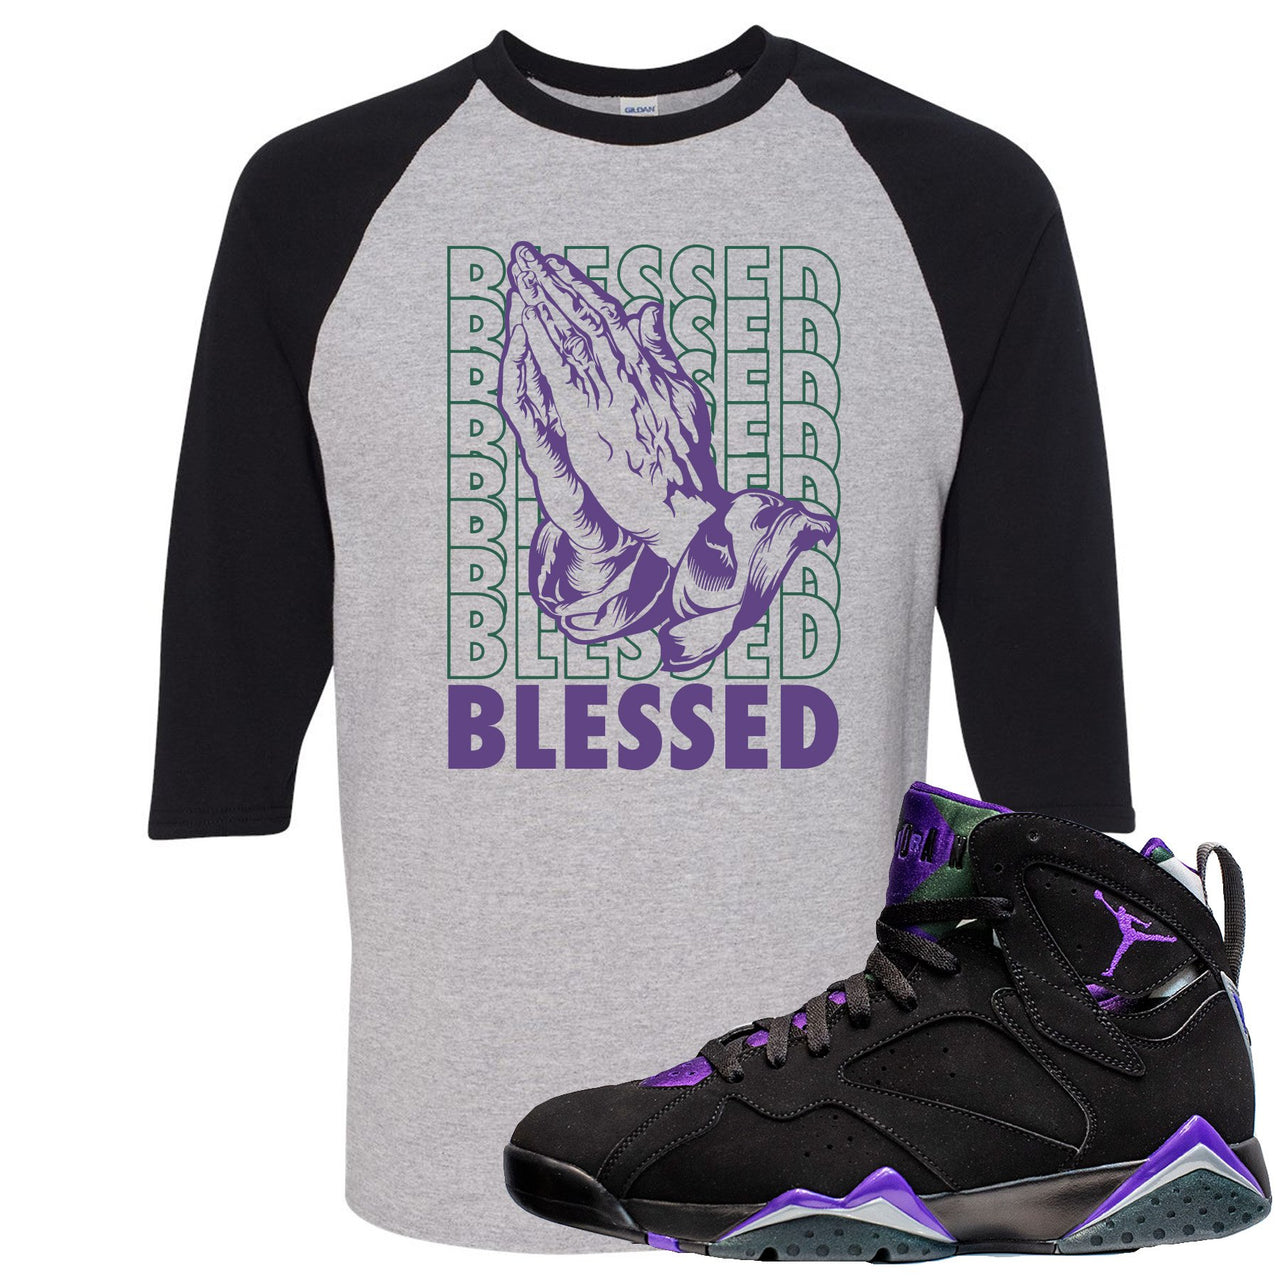 Ray Allen 7s Sneaker Hook Up Blessed Praying Hands Sports Gray and Black Raglan T-Shirt